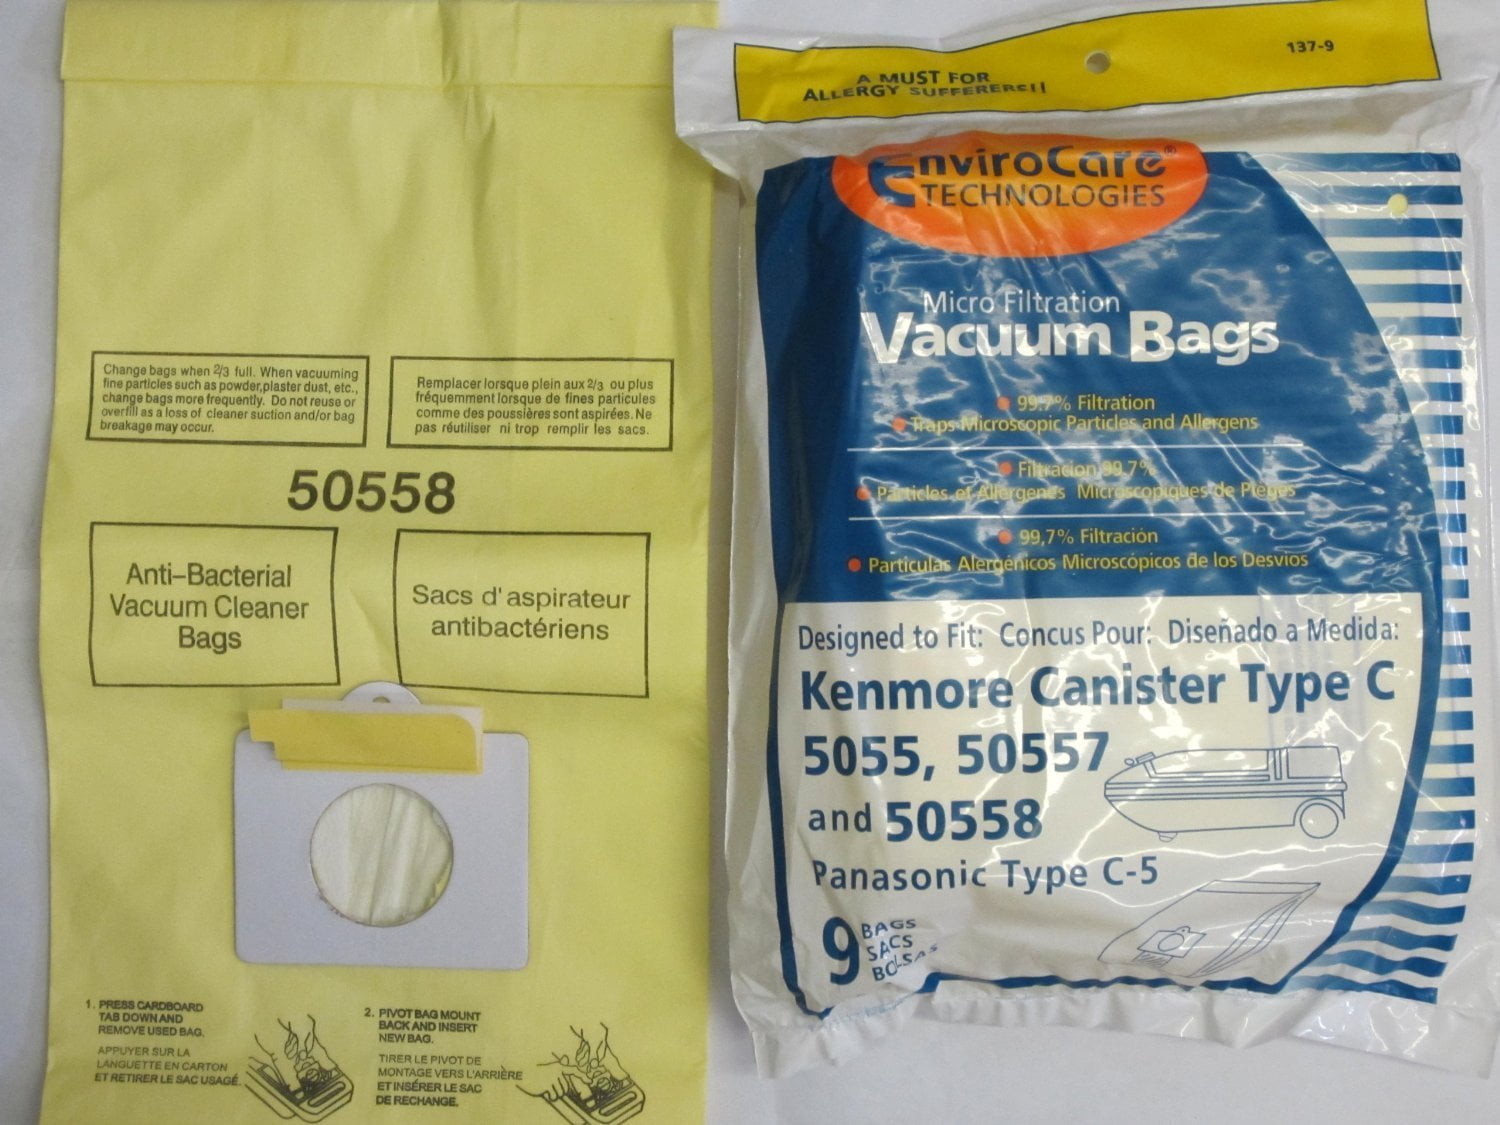 50557 and Panasonic Type C-5 6 pack 50558 Envirocare Replacement Allergen Vacuum Bags for Kenmore Canister Type C and Q 50555